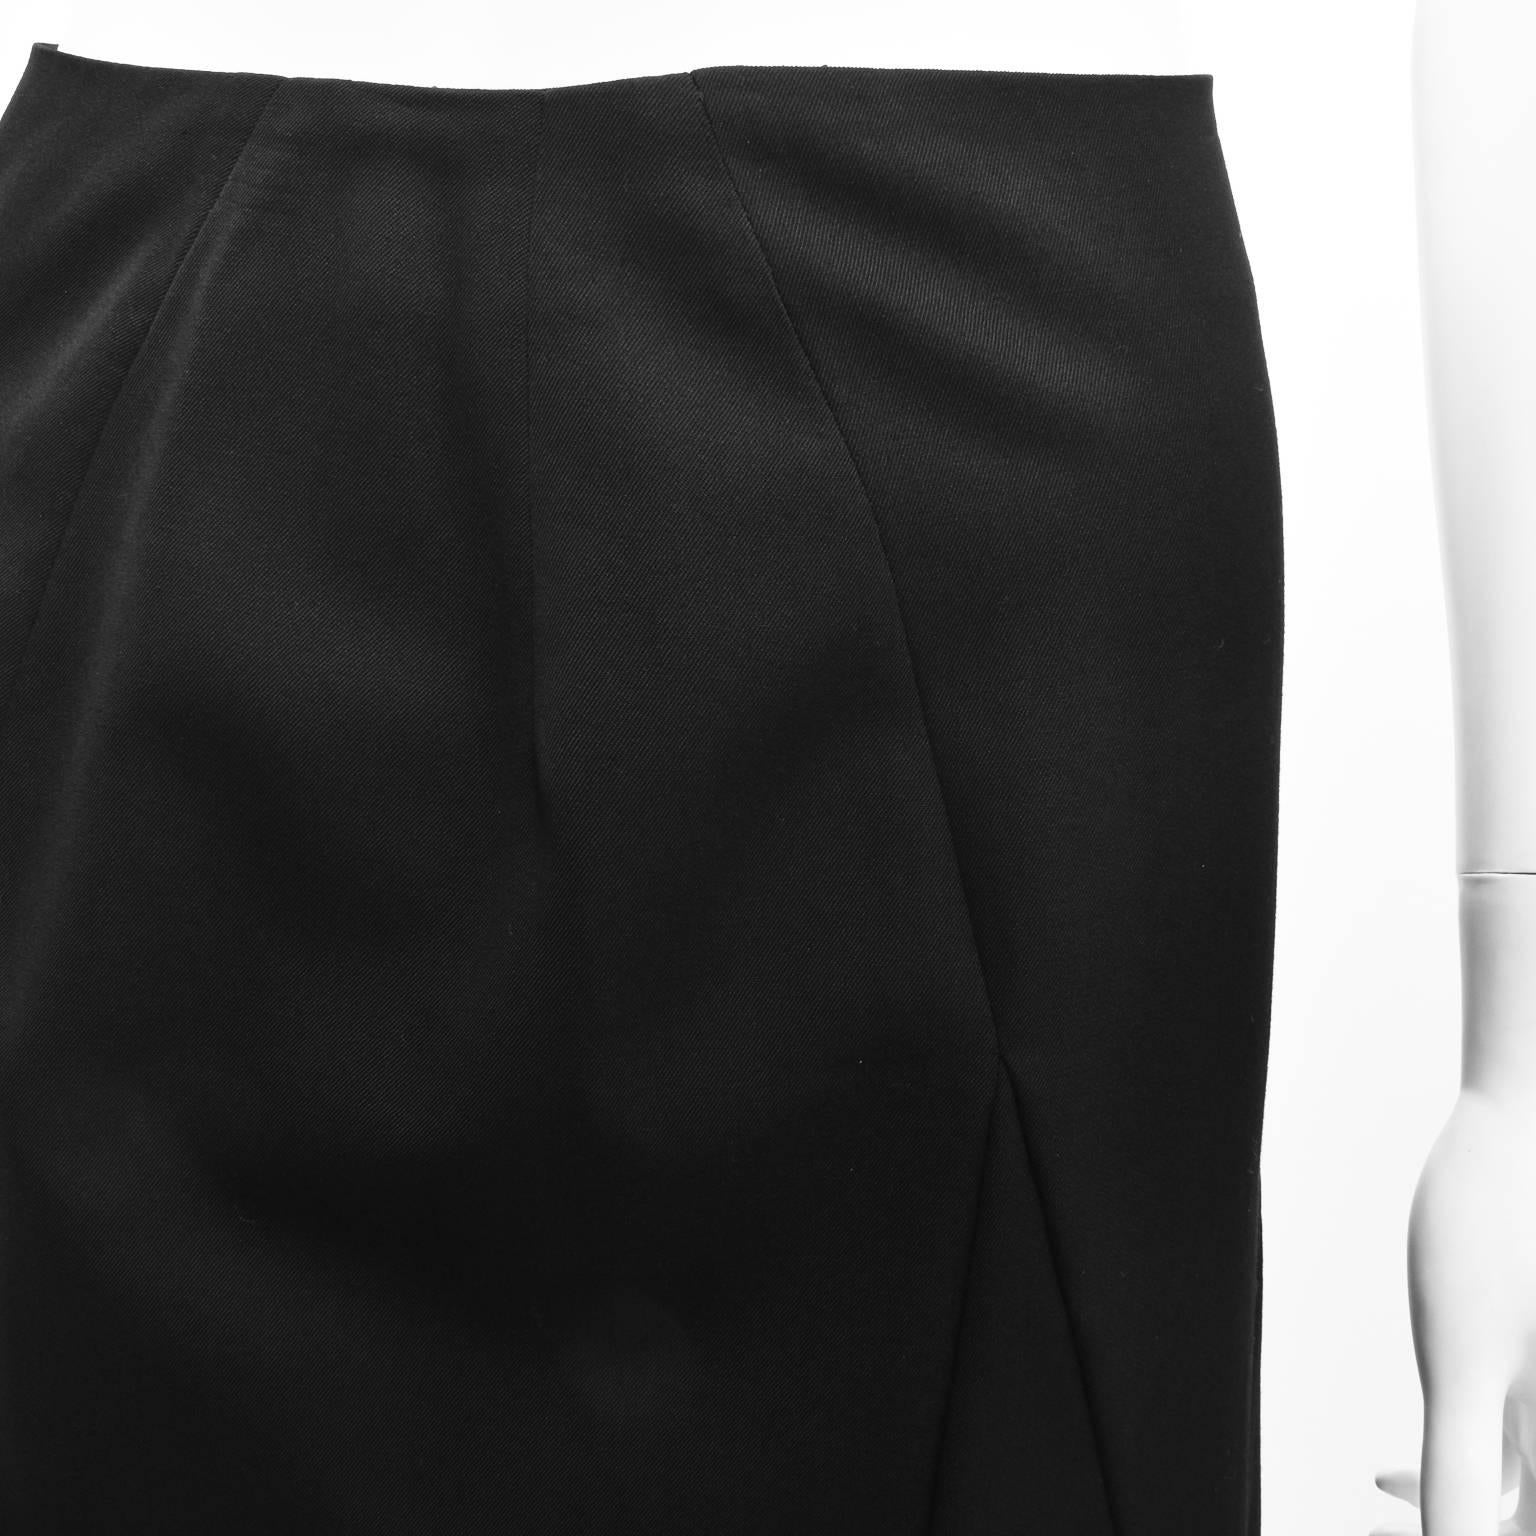 A long black high-waisted skirt from Yohji Yamamoto Noir featuring an A-line shape and several asymmetrical wool panels to the front, a zip fastening to the back. A Japanese size 2 (small to extra small), it is in excellent condition. 

